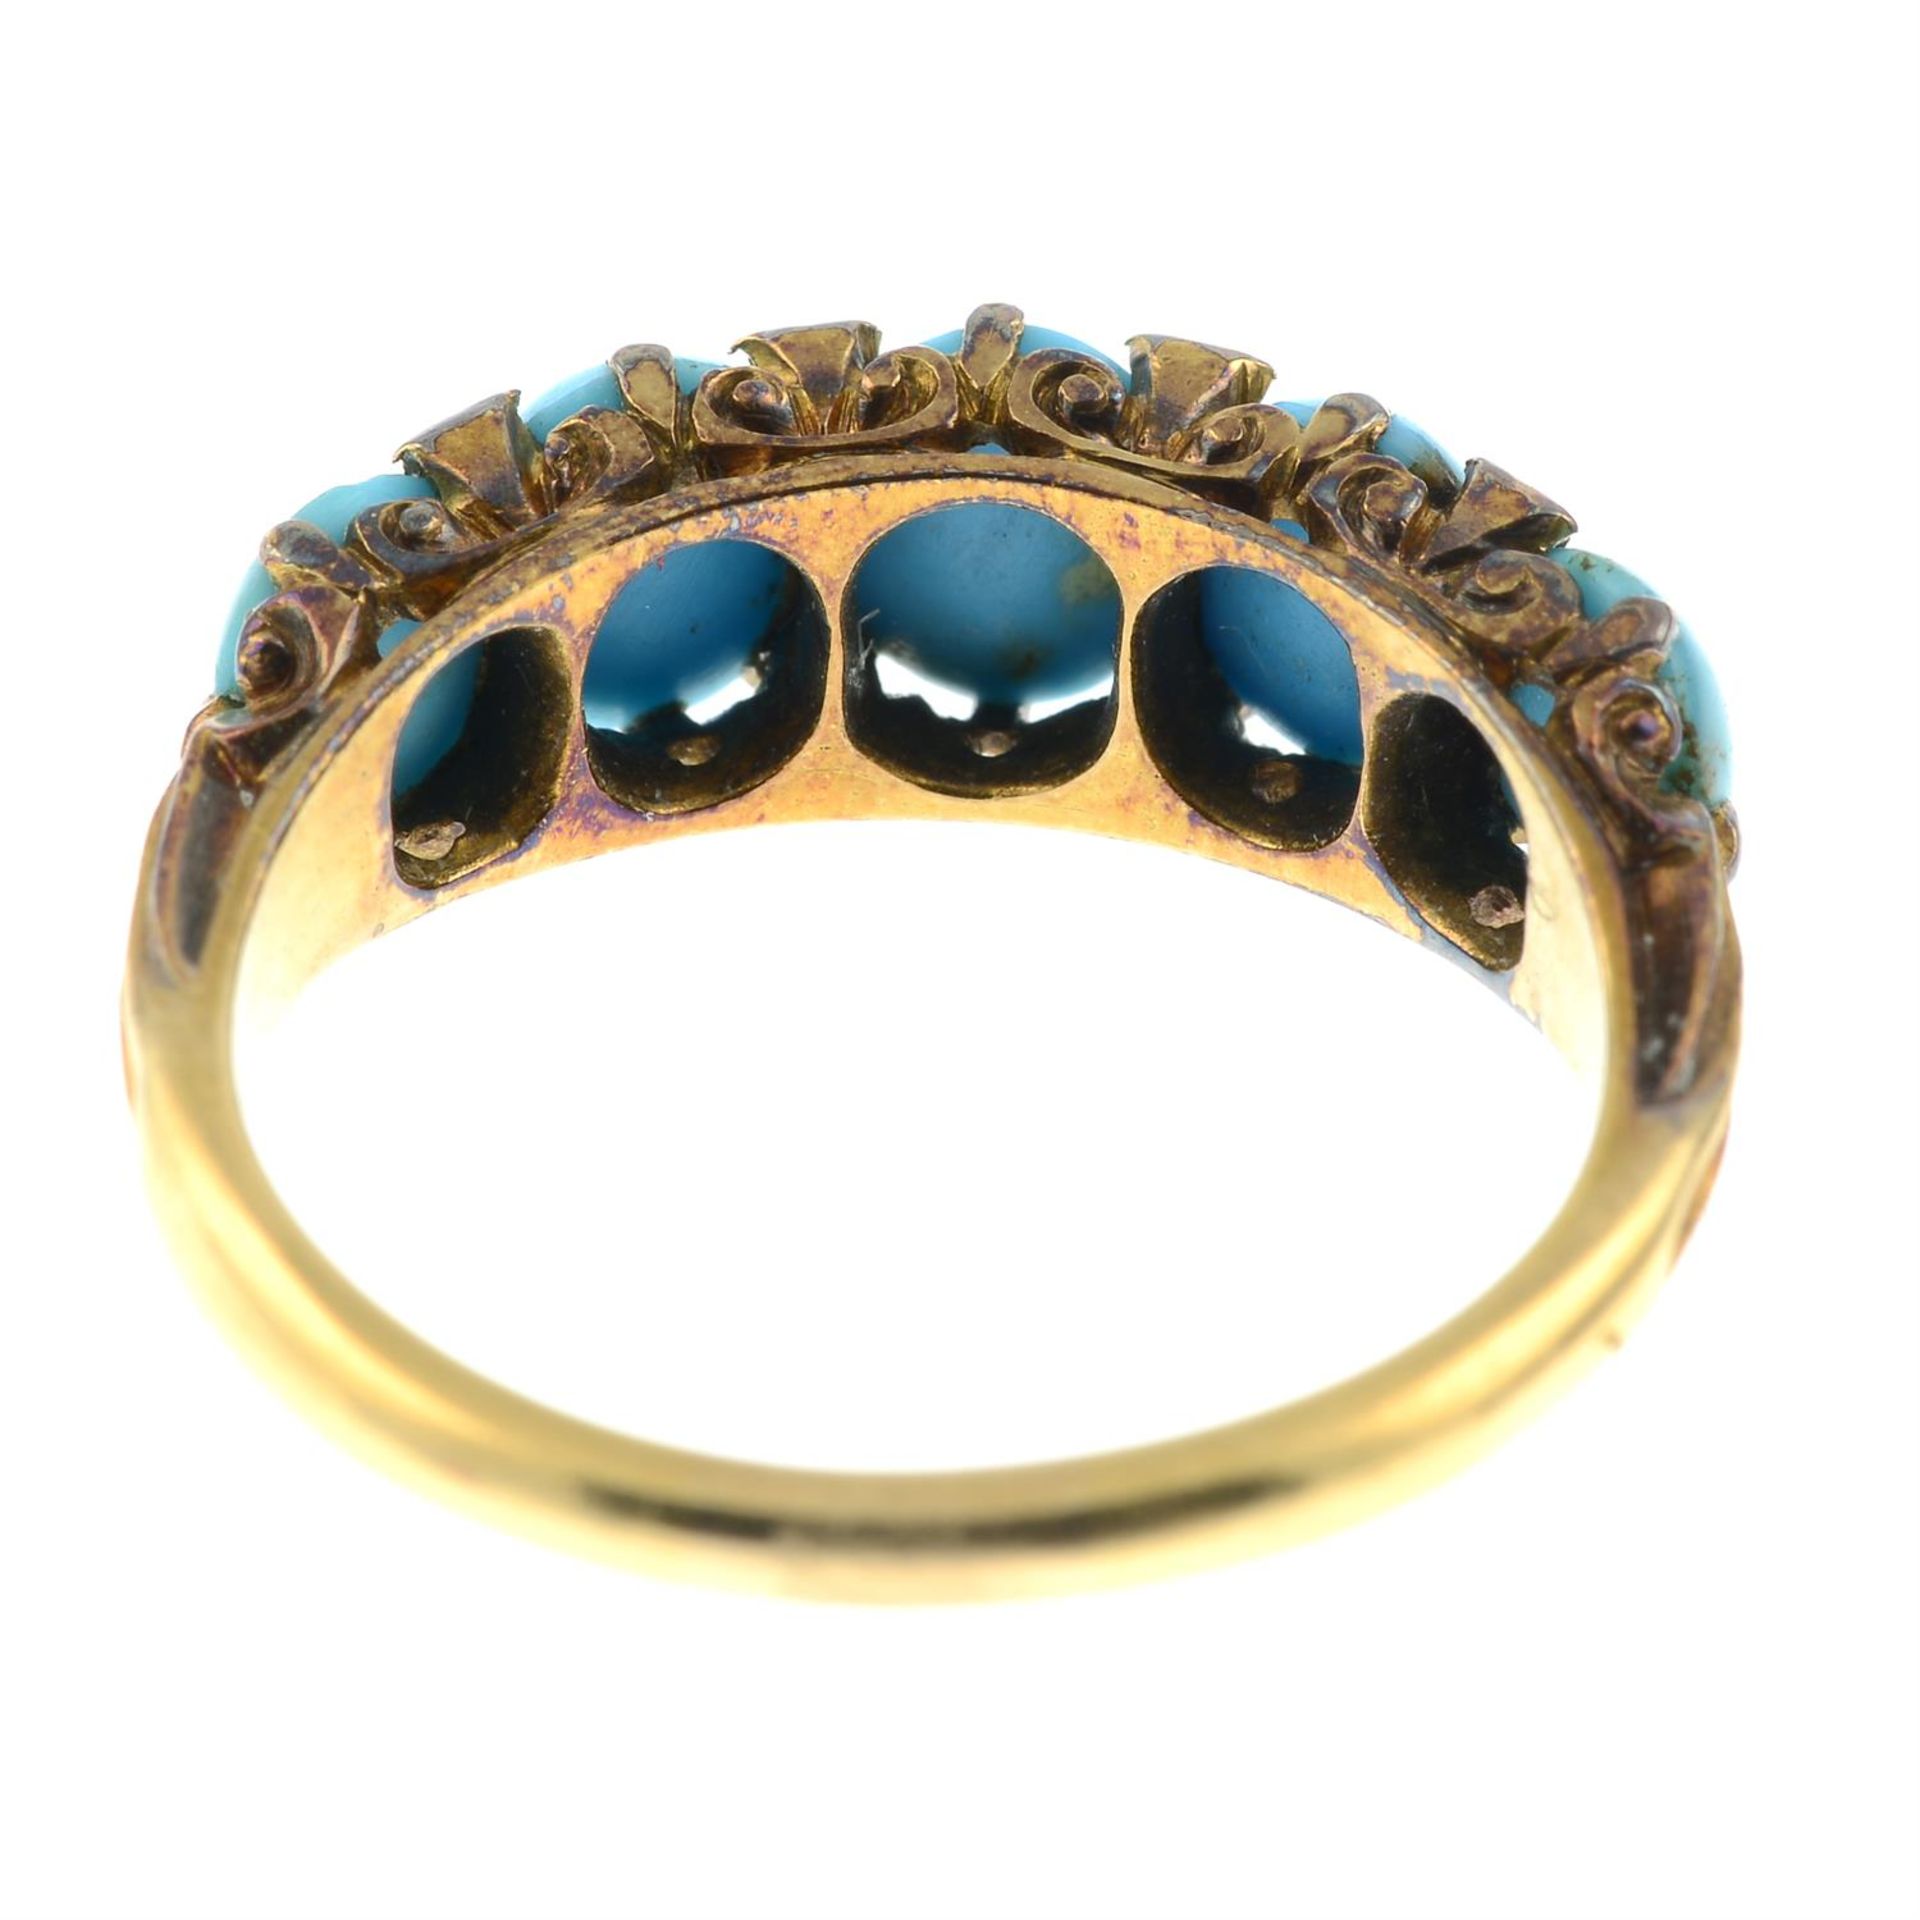 An early 20th century 18ct gold turquoise and rose-cut diamond ring. - Image 3 of 3